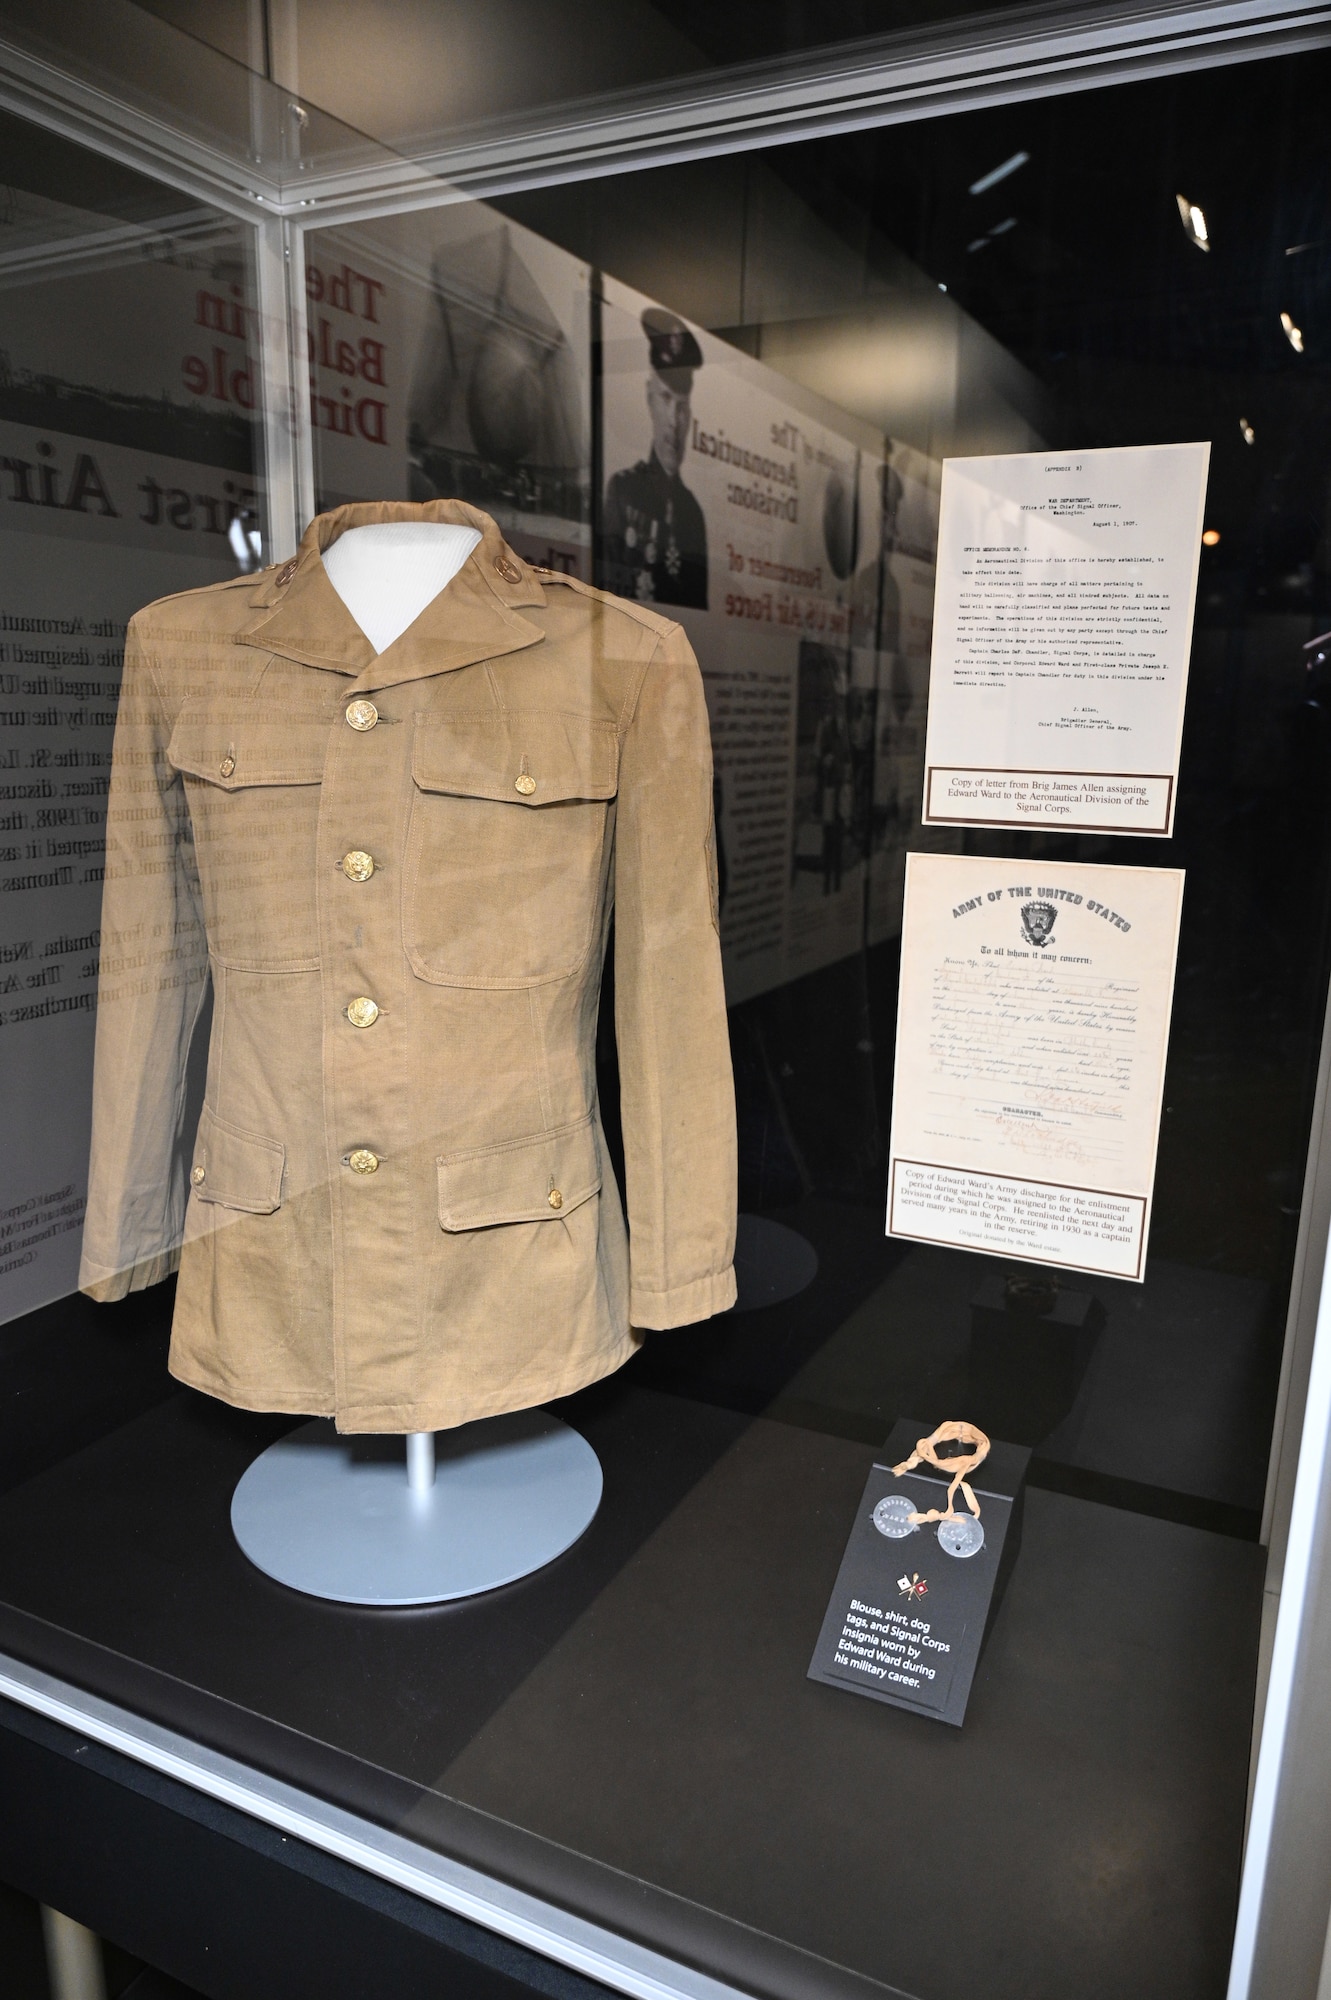 Blouse, shirt, dog tags, and Signal Corps insignia worn by Edward Ward during his military career.